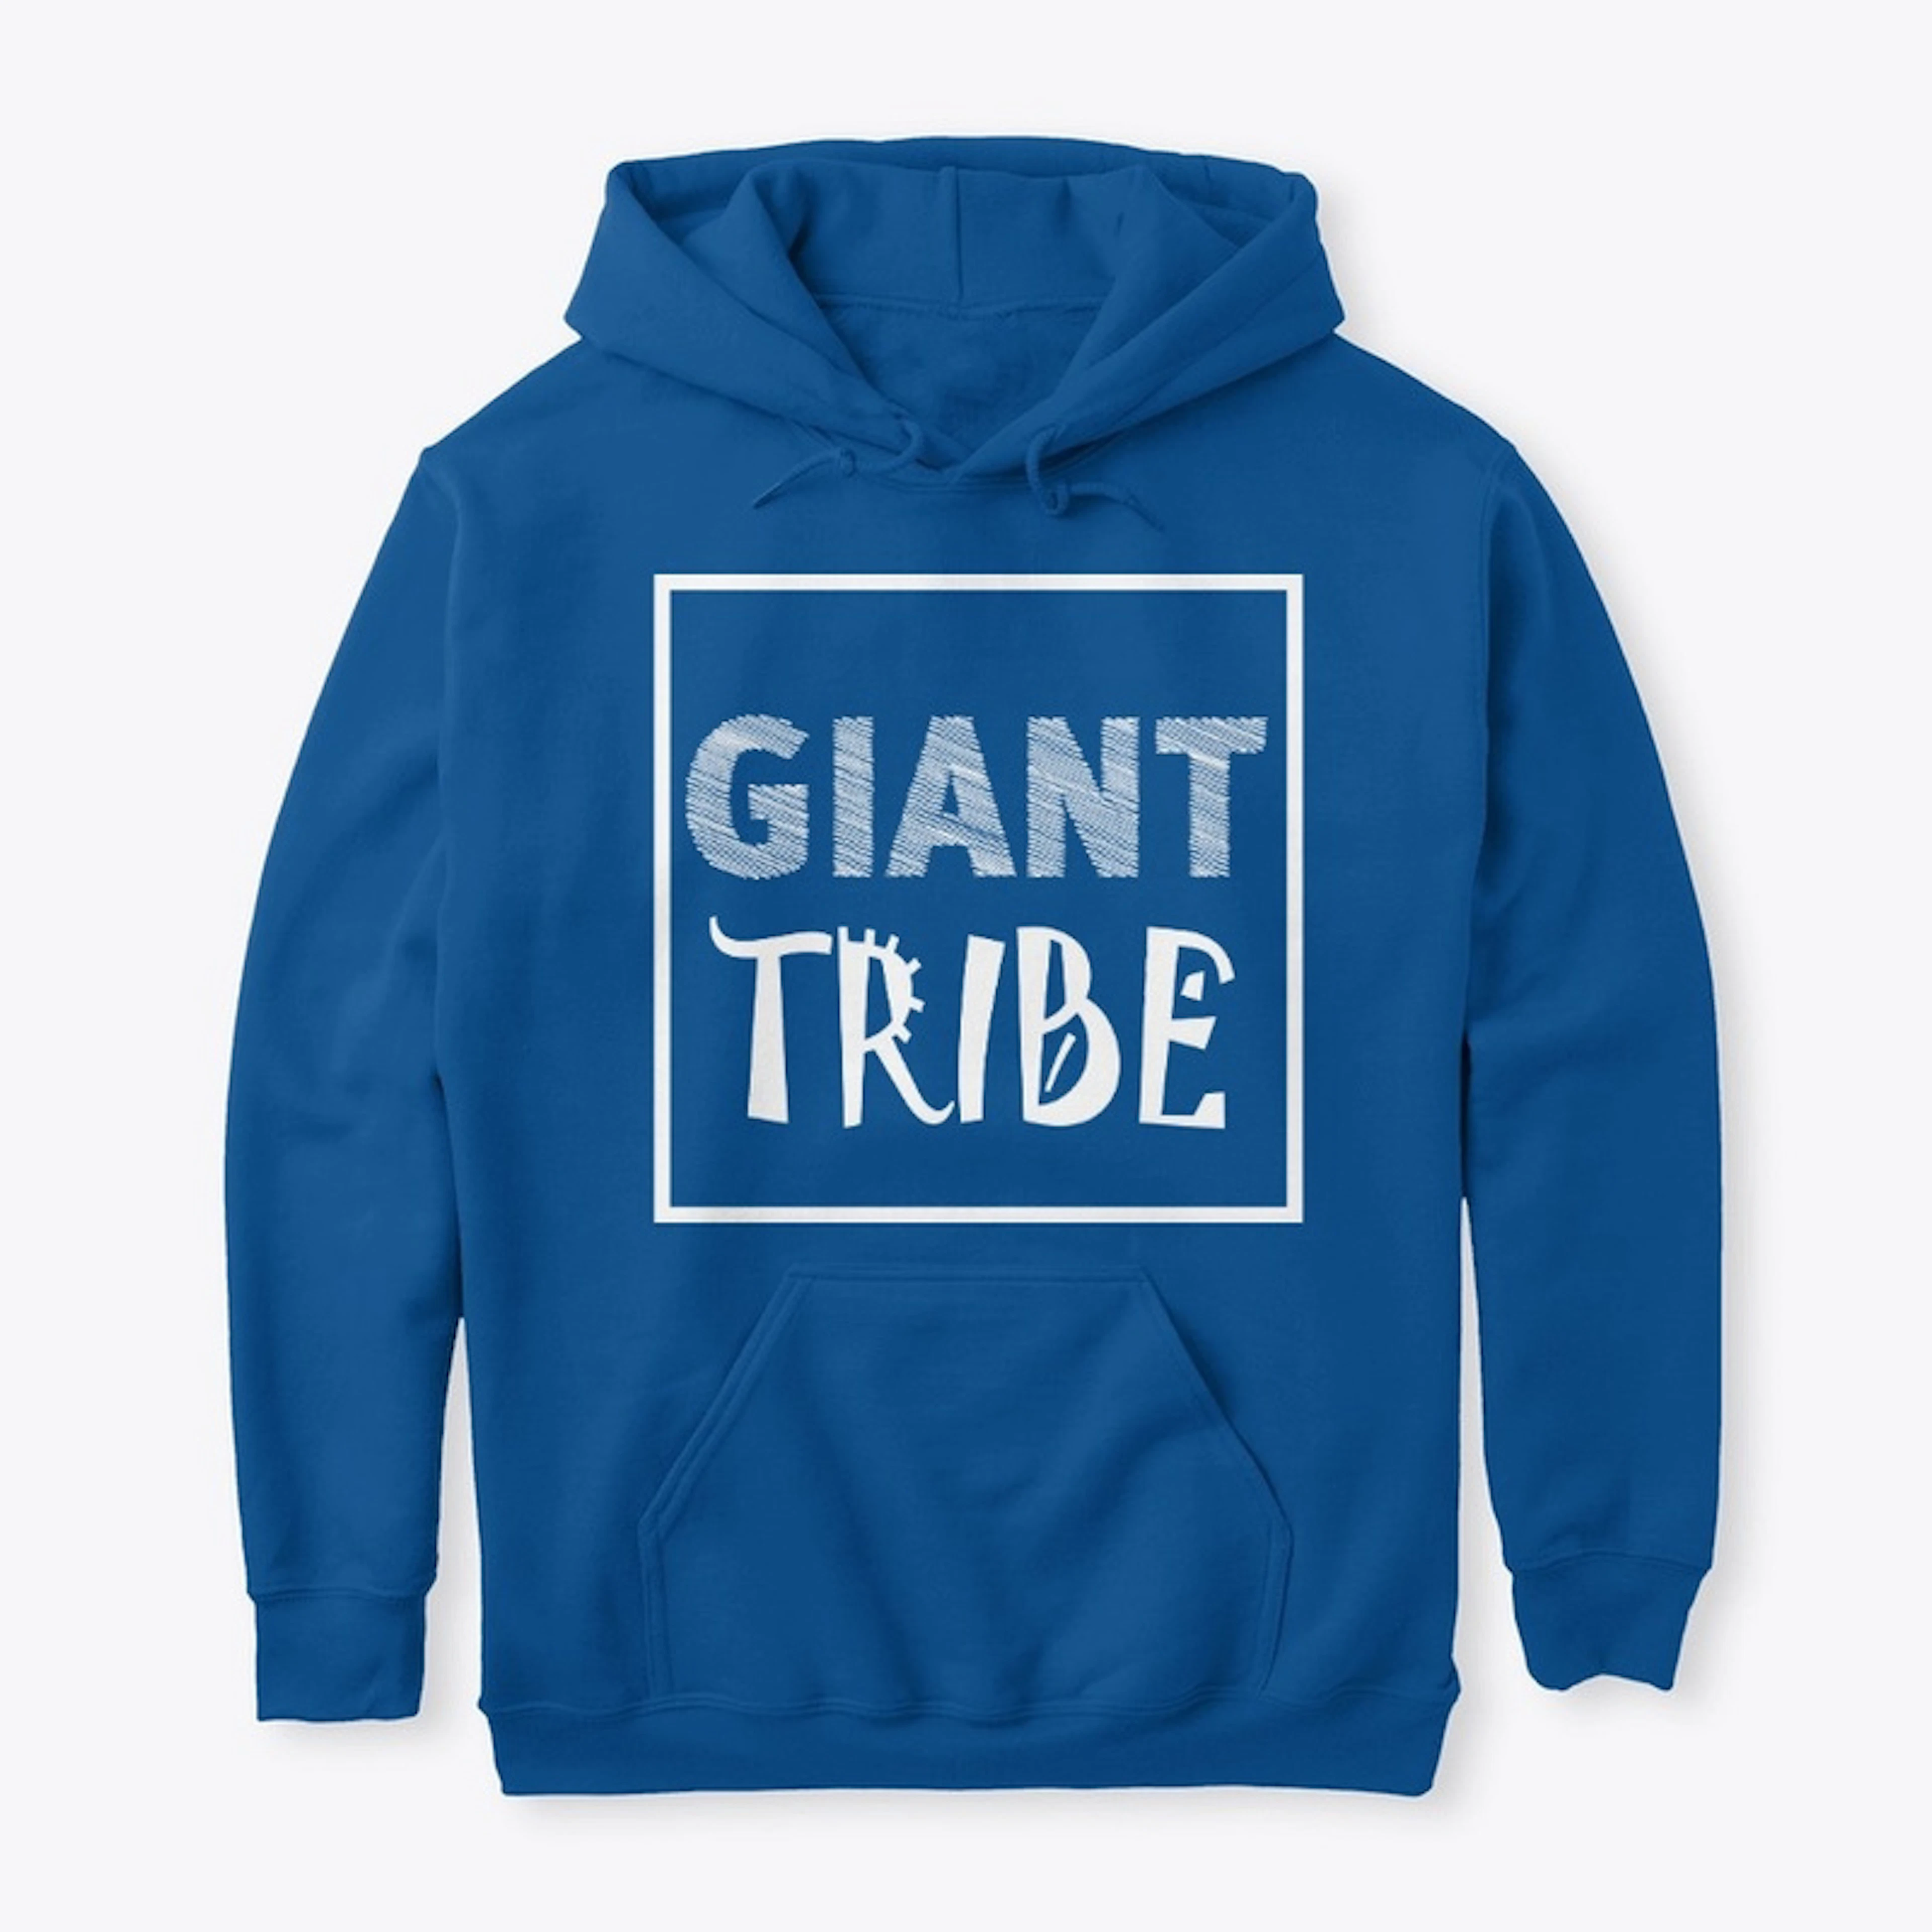 Giant Tribe